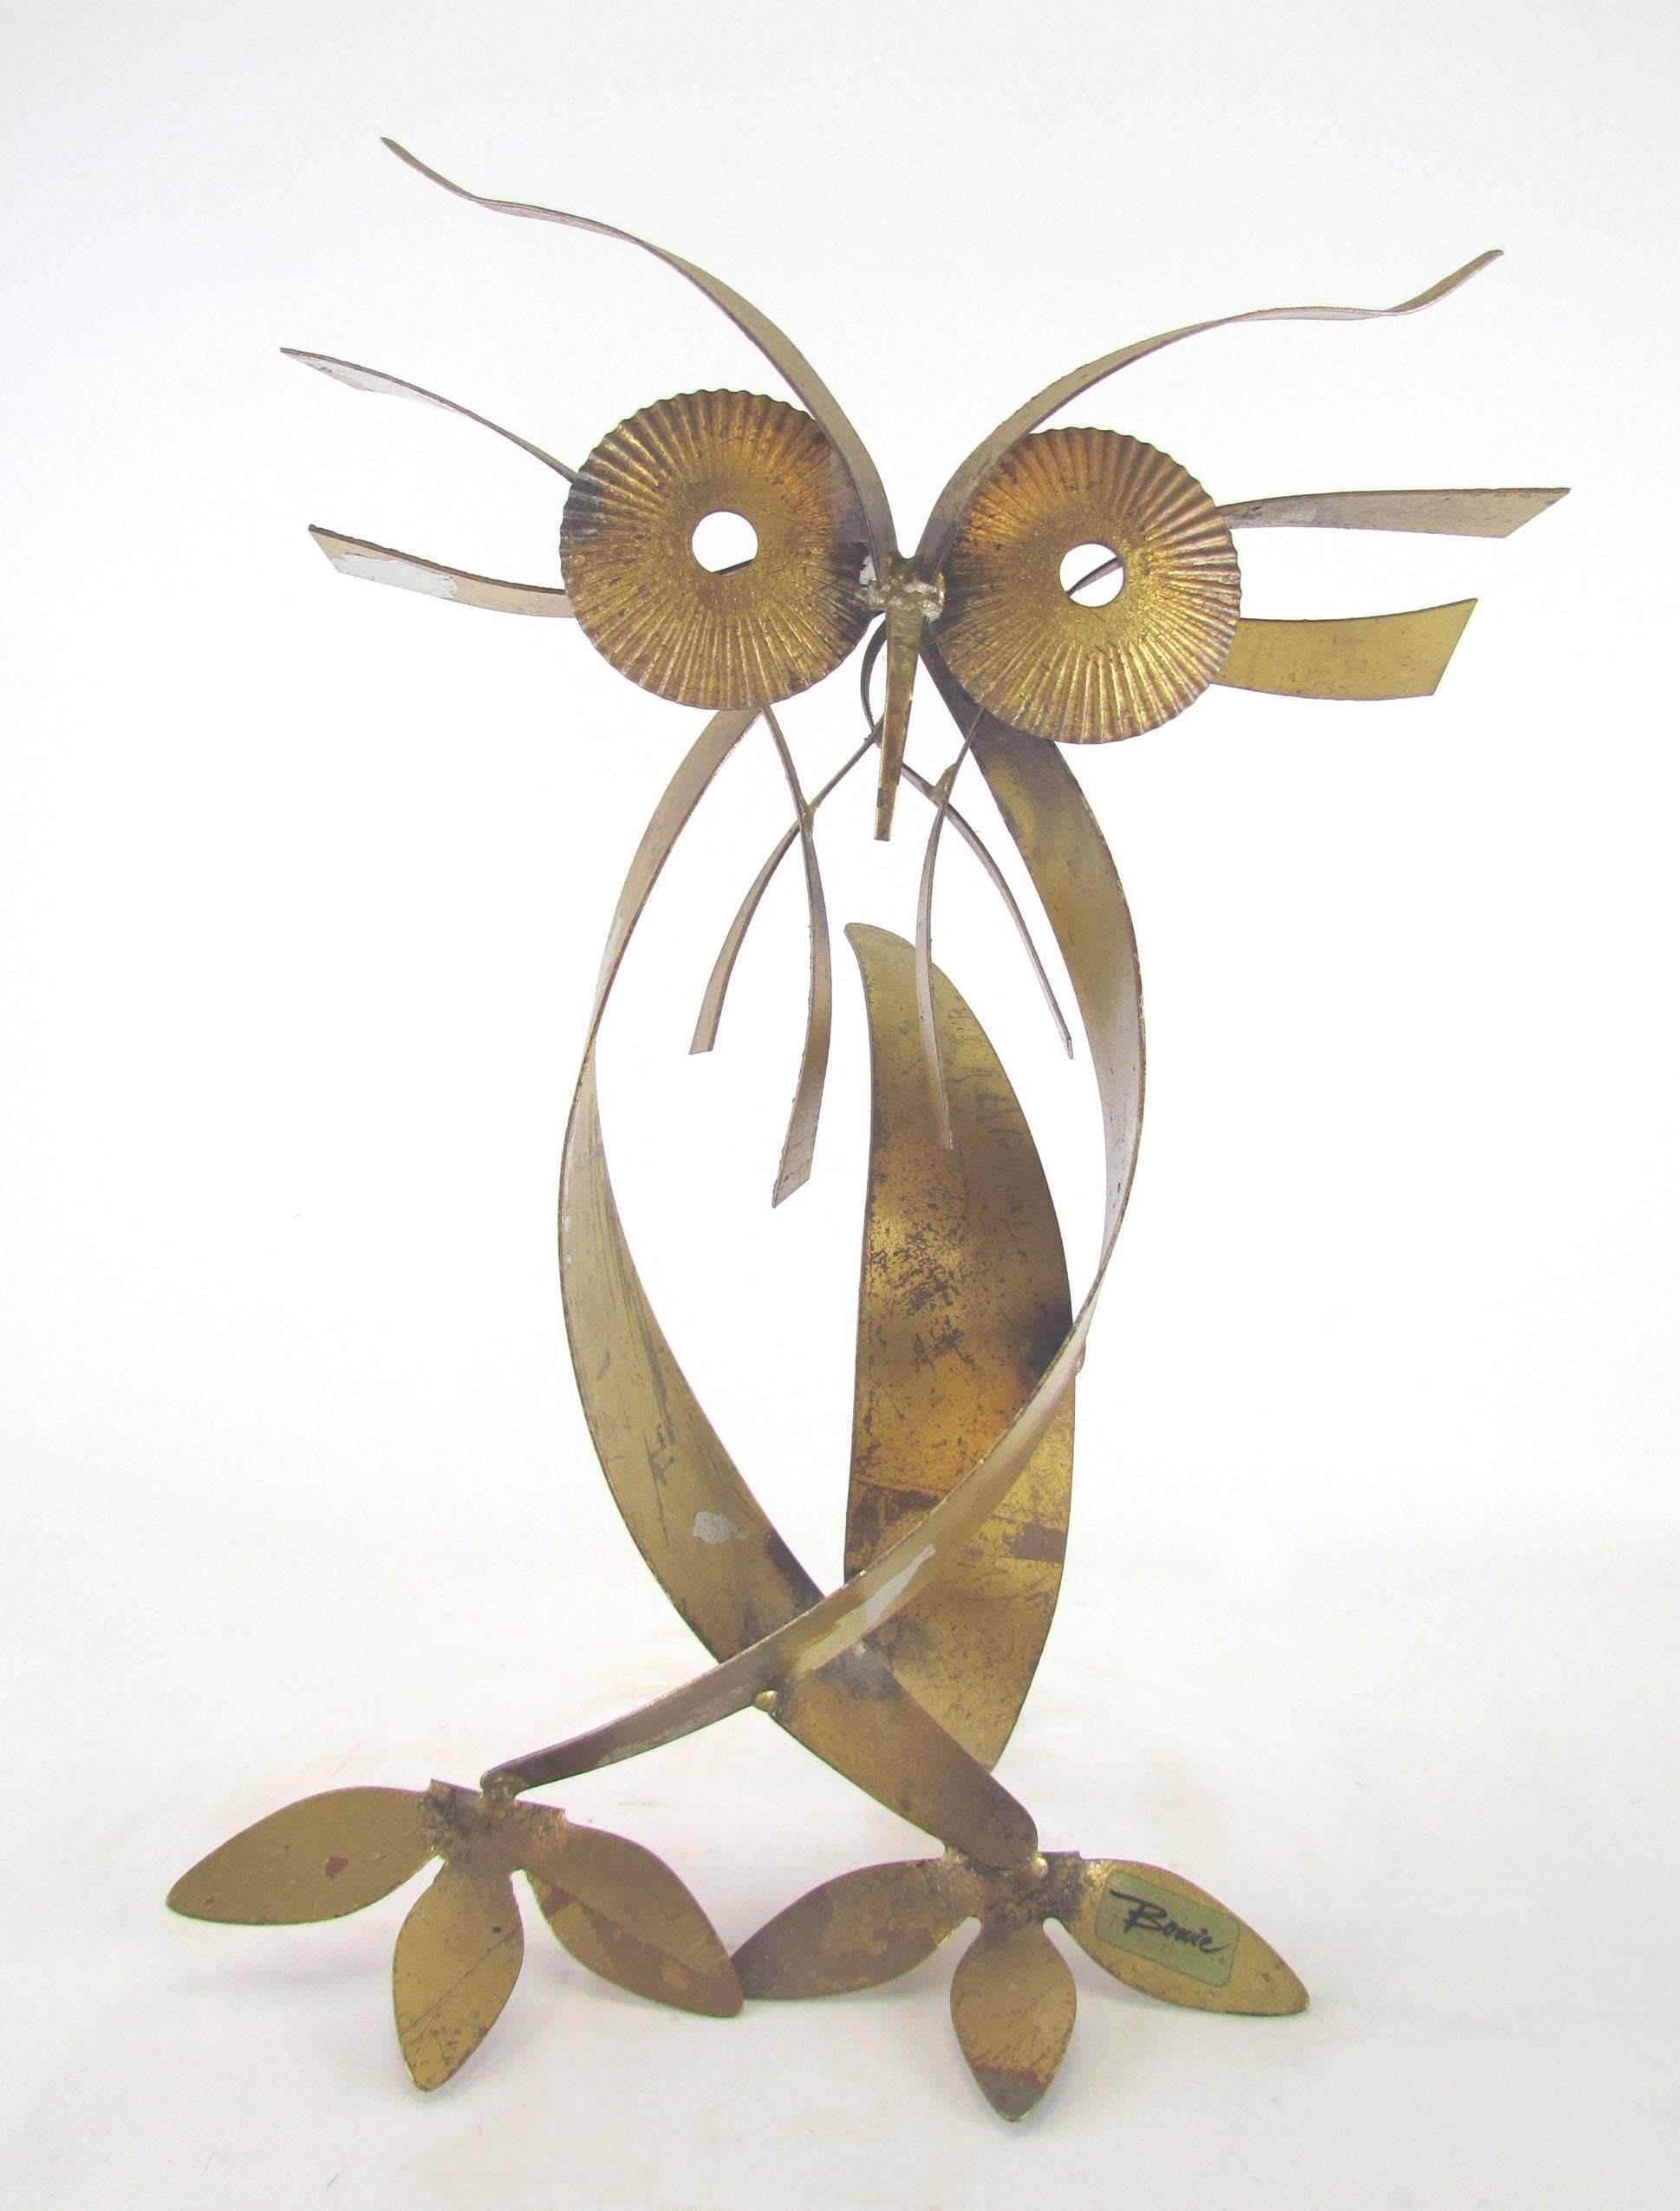 Metal work owl figure by renowned sculptor William Bowie, circa 1970s. Steel sheet with applied gold and silver foil leafing. 

William Bowie was active at the same time as the popular Curtis Jere Studio which produced its various abstract and